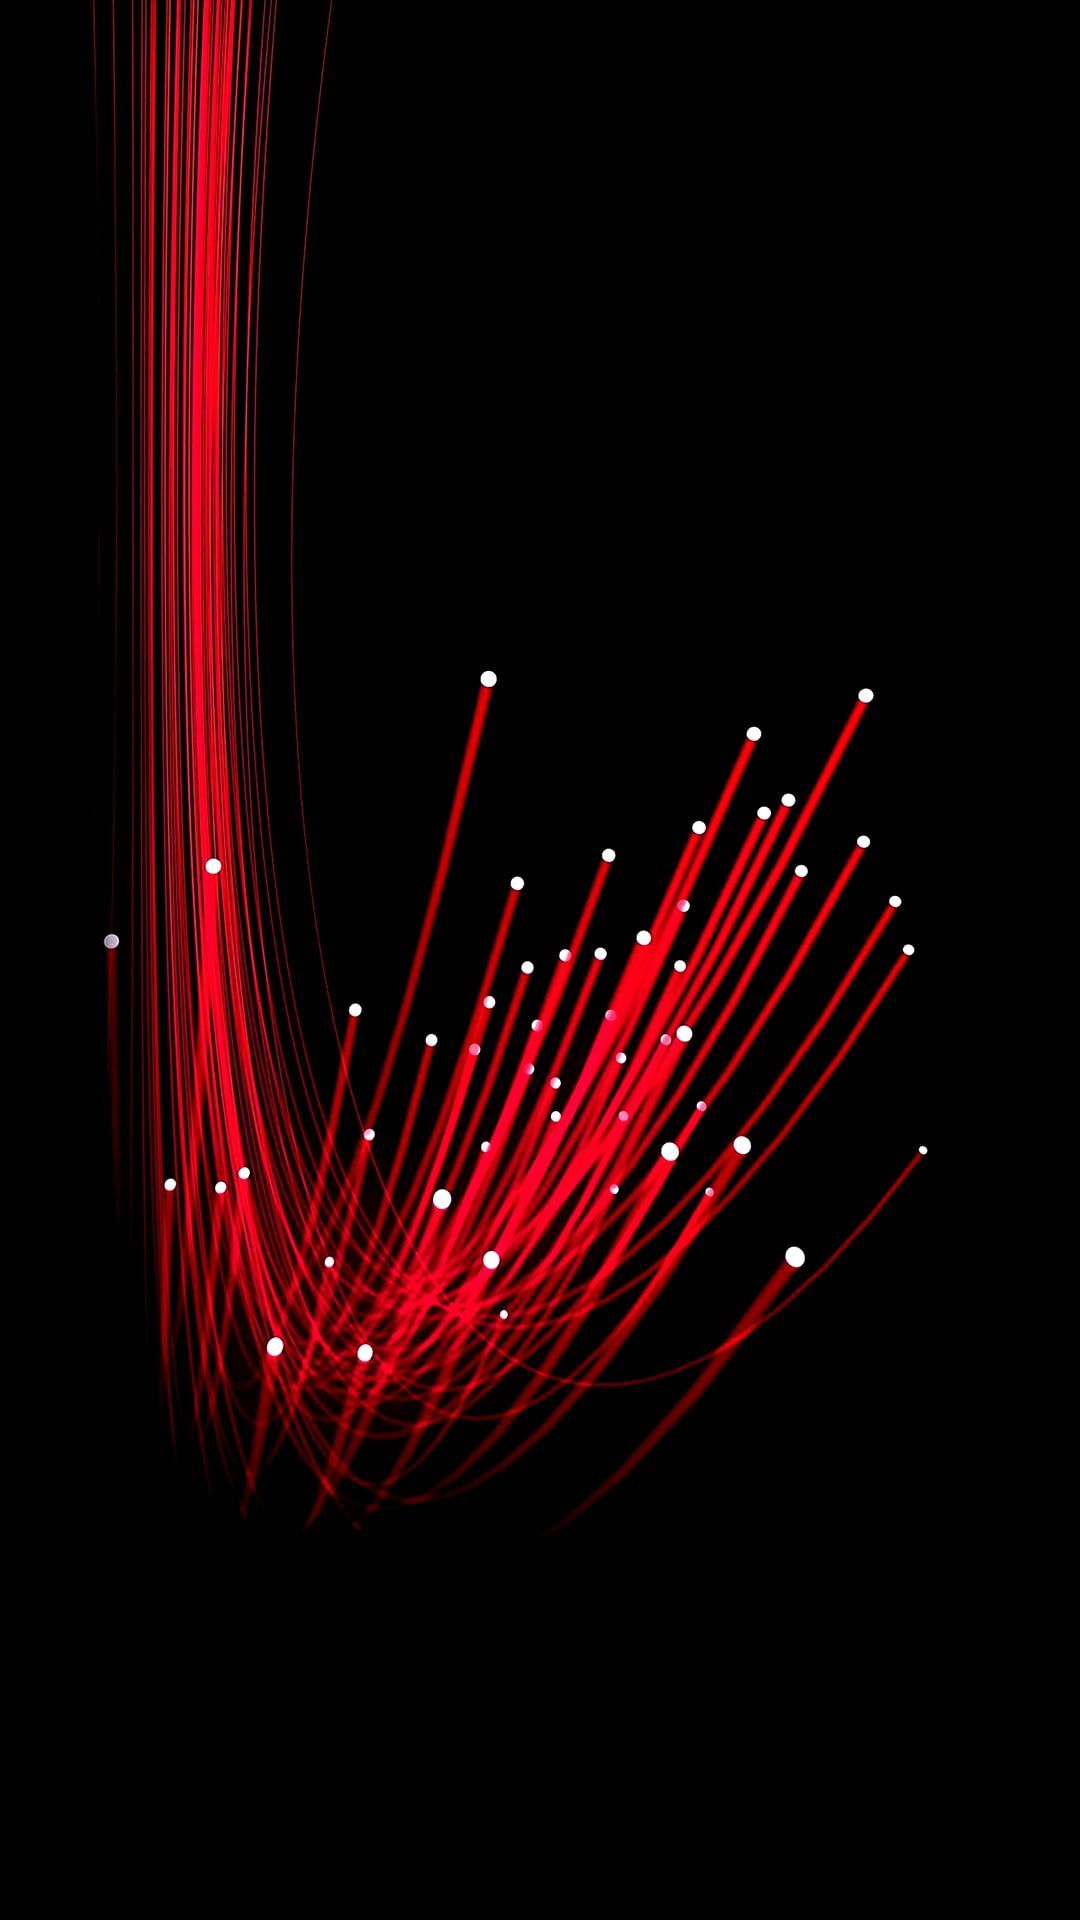 Abstract Black White Red Wallpaper Android. iPhone wallpaper image, Red and white wallpaper, Black and blue wallpaper